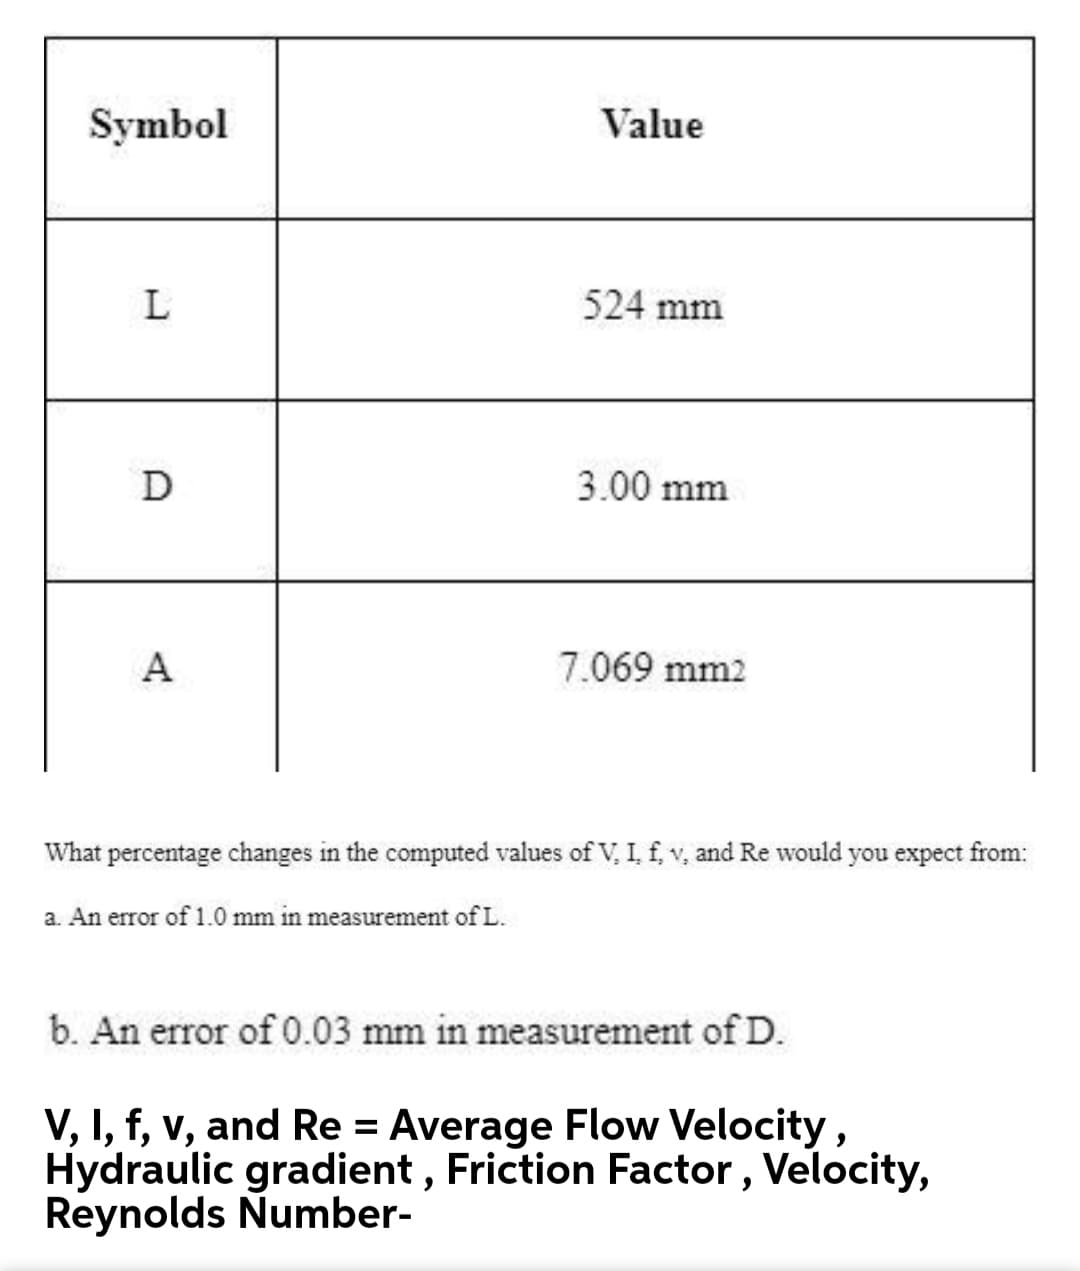 Symbol
Value
L
524 mm
D
3.00 mm
A
7.069 mm2
What percentage changes in the computed values of V, I, f, v, and Re would you expect from:
a. An error of 1.0 mm in measurement of L.
b. An error of 0.03 mm in measurement of D.
V, I, f, v, and Re = Average Flow Velocity,
Hydraulic gradient, Friction Factor , Velocity,
Reynolds Number-
